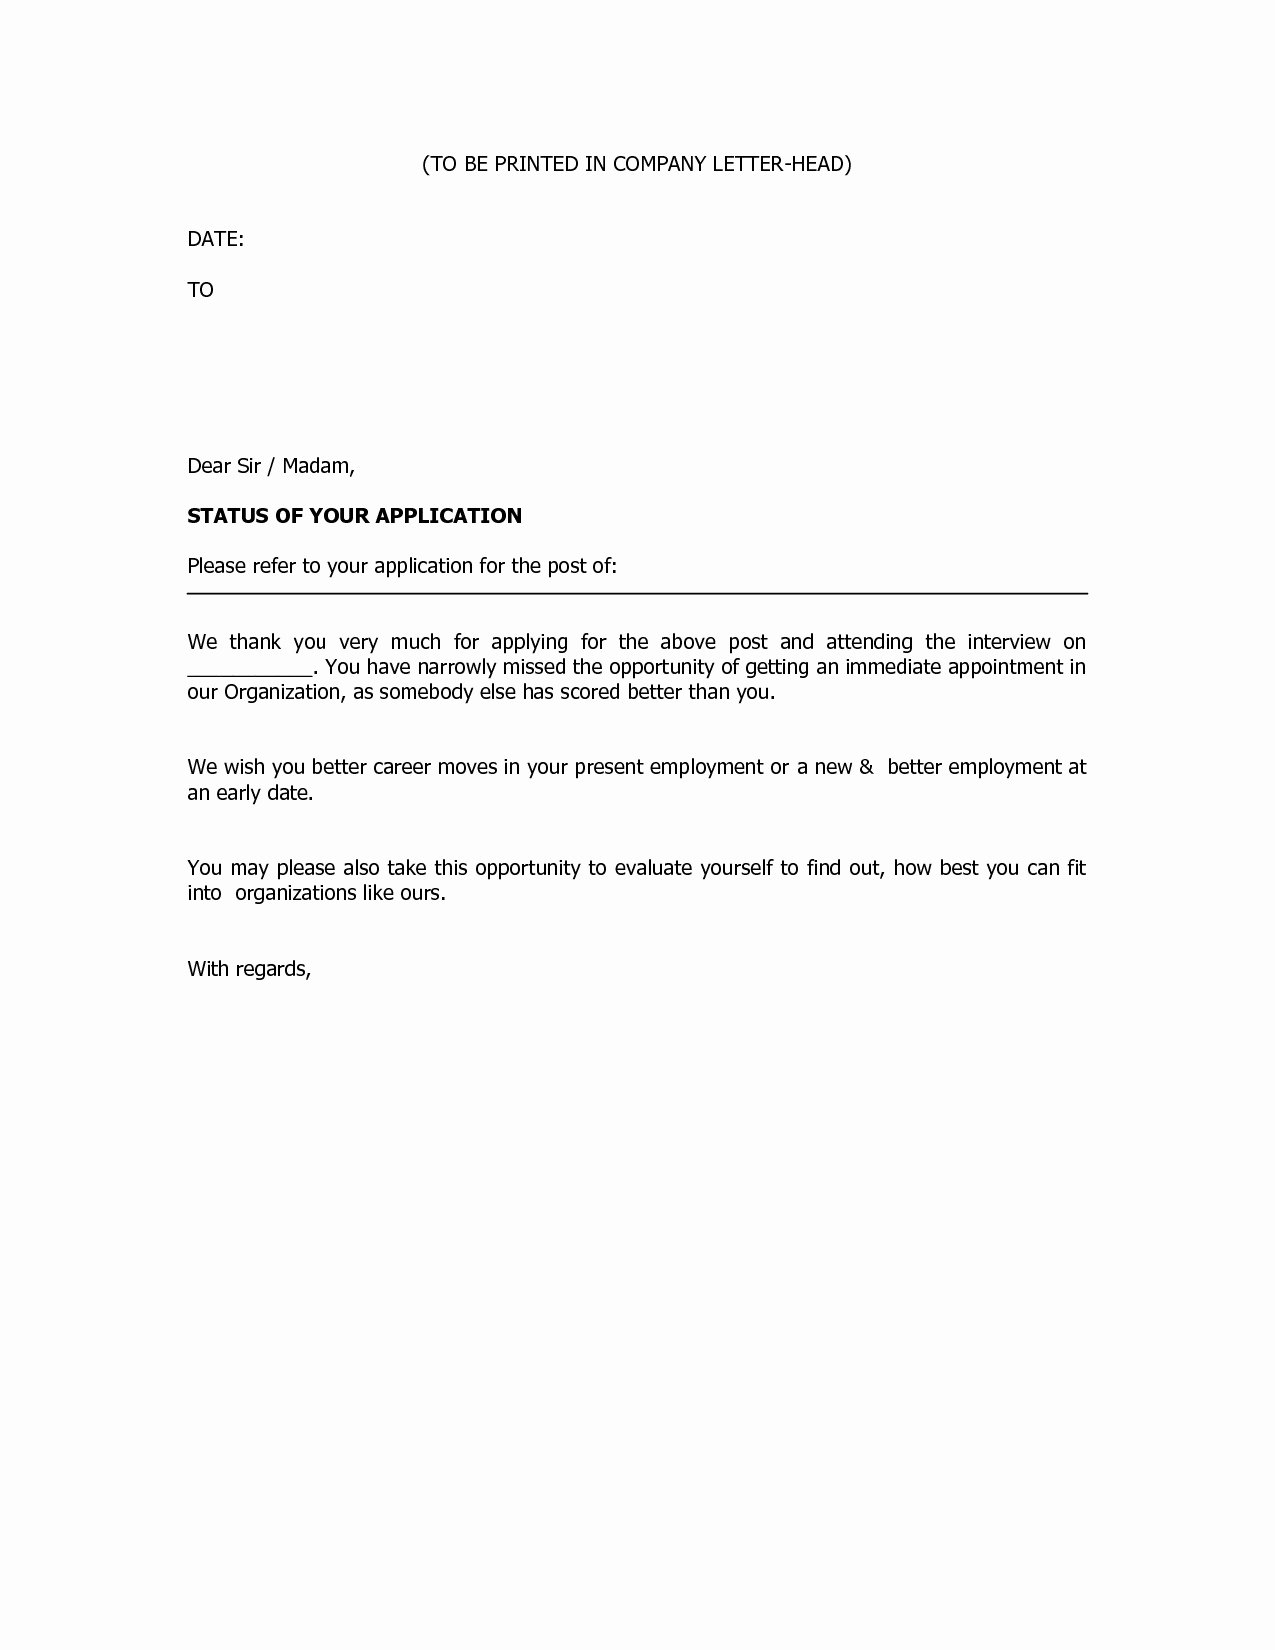 Job Rejection Email Template Lovely Rejection Letter Template after Interview Collection